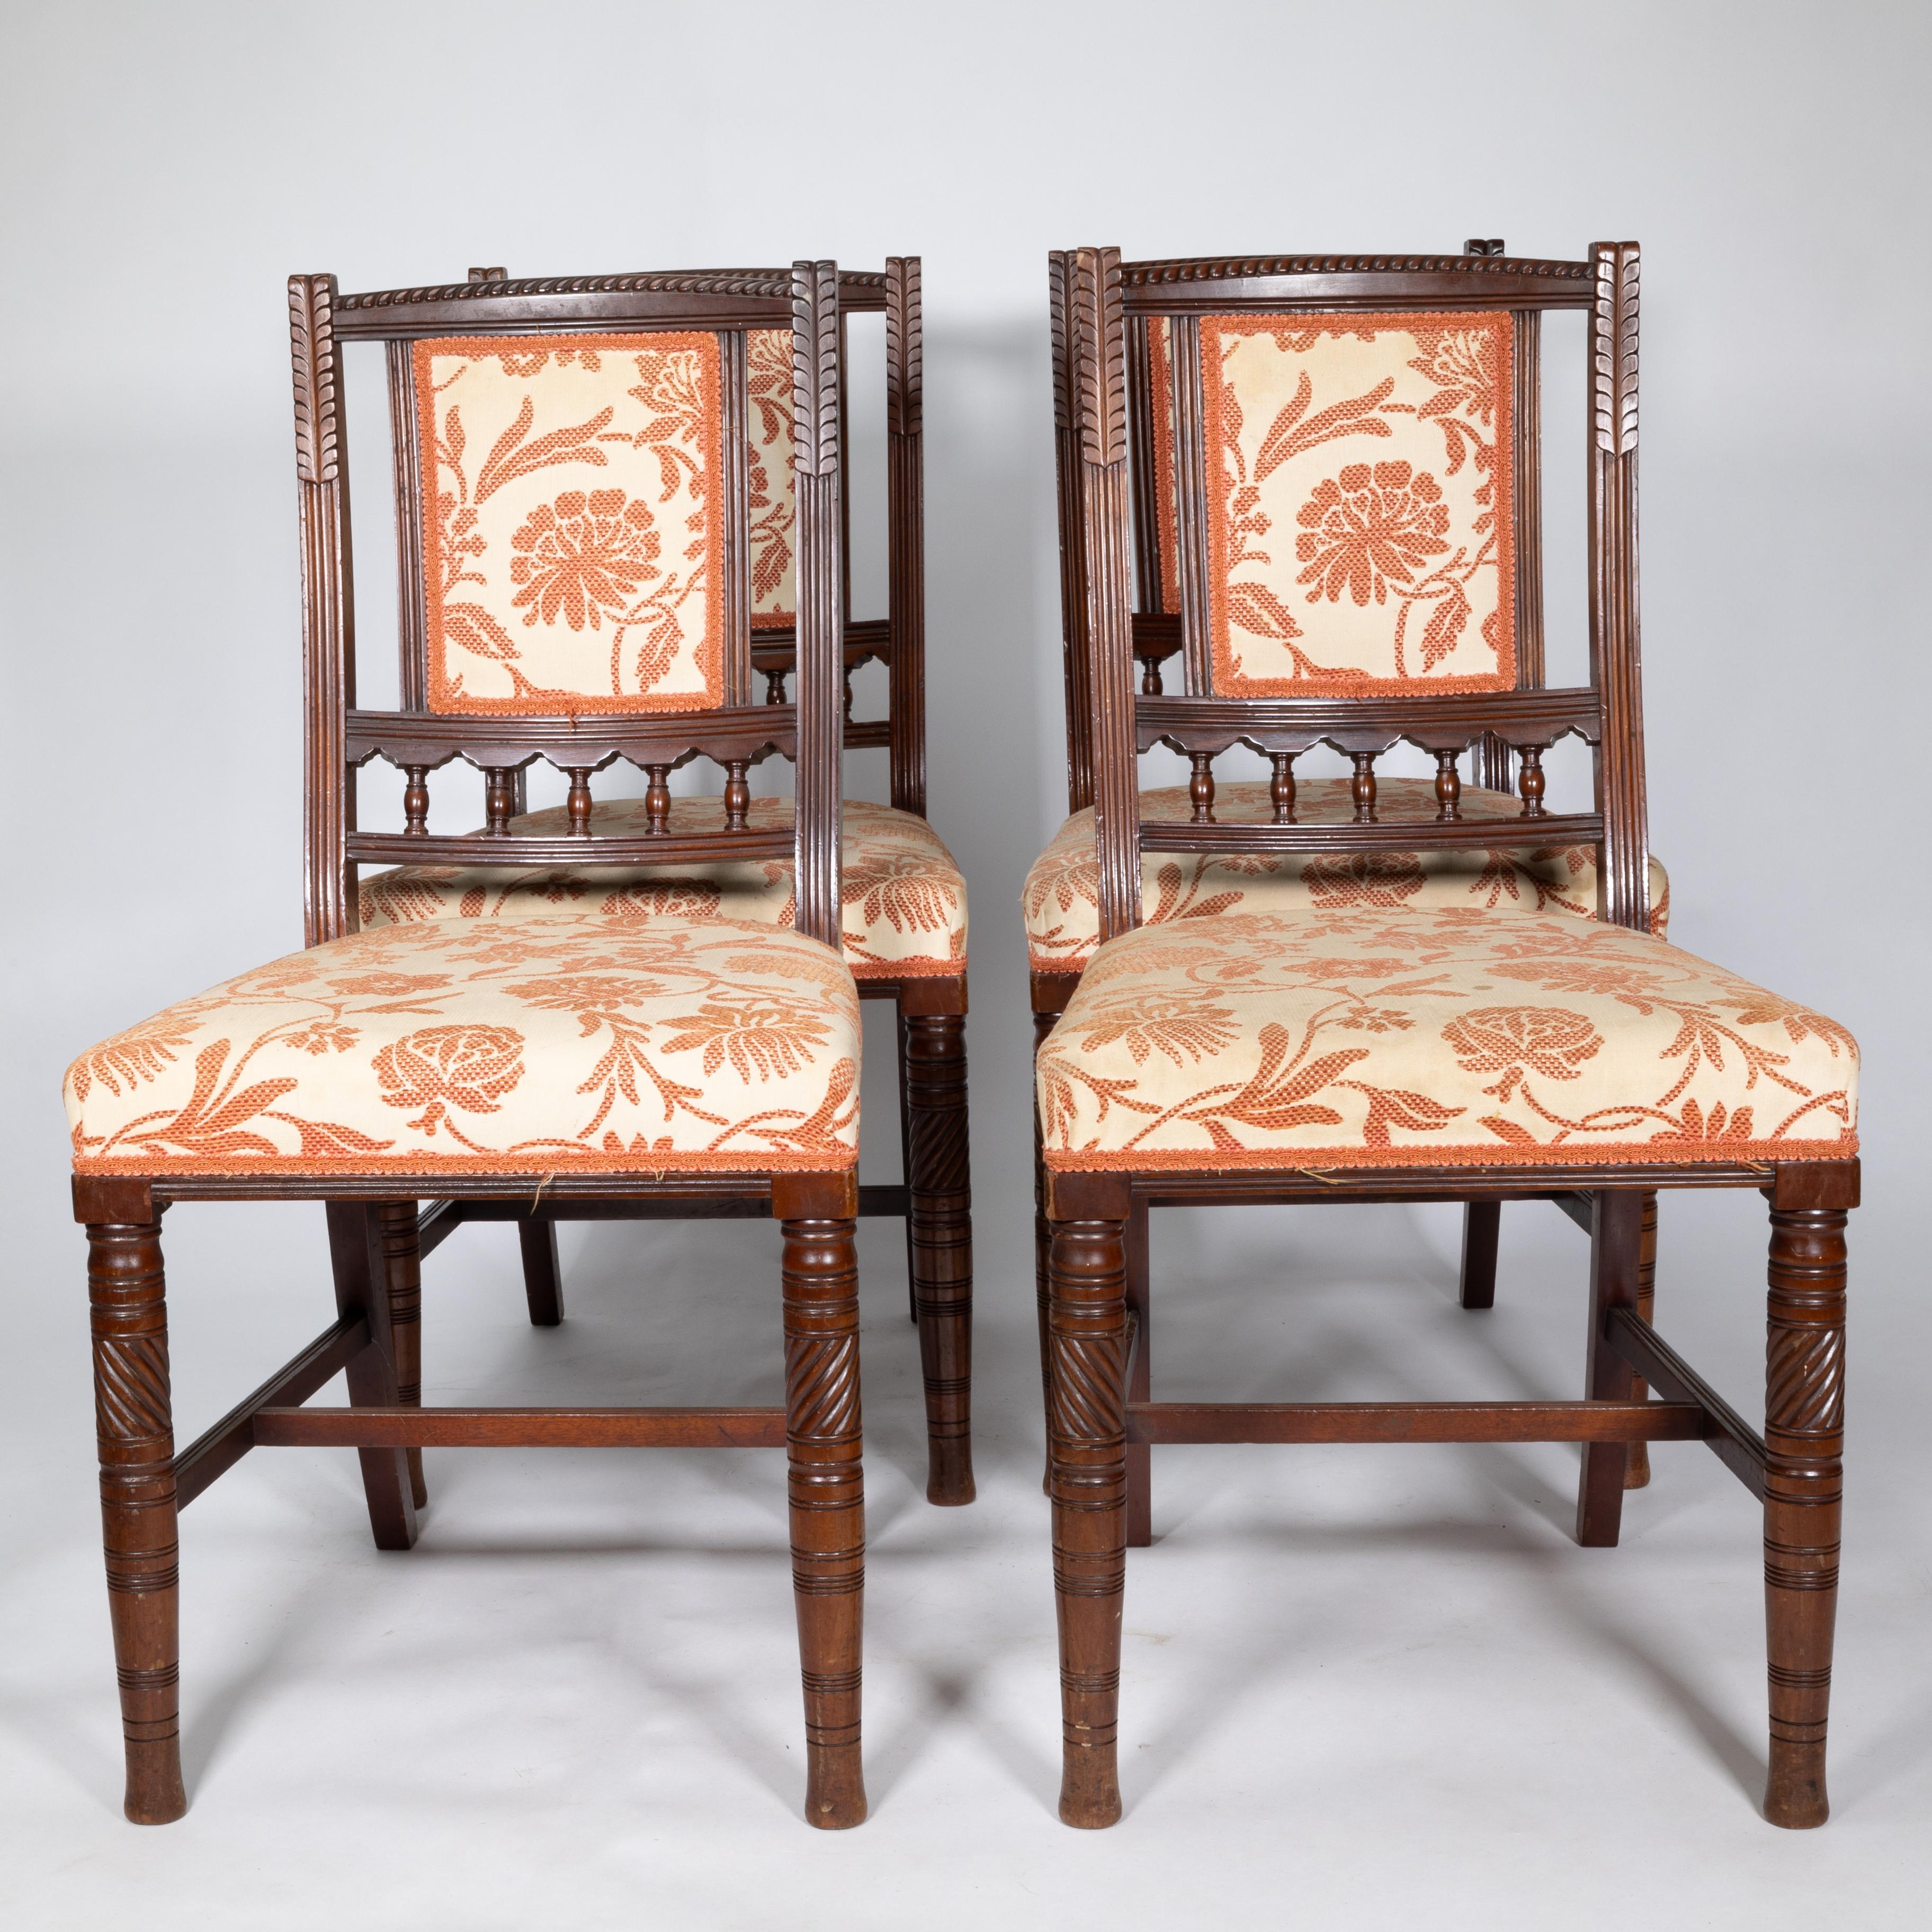 Bruce Talbert (attributed). Set of four fine quality Aesthetic Movement walnut dining chairs.
